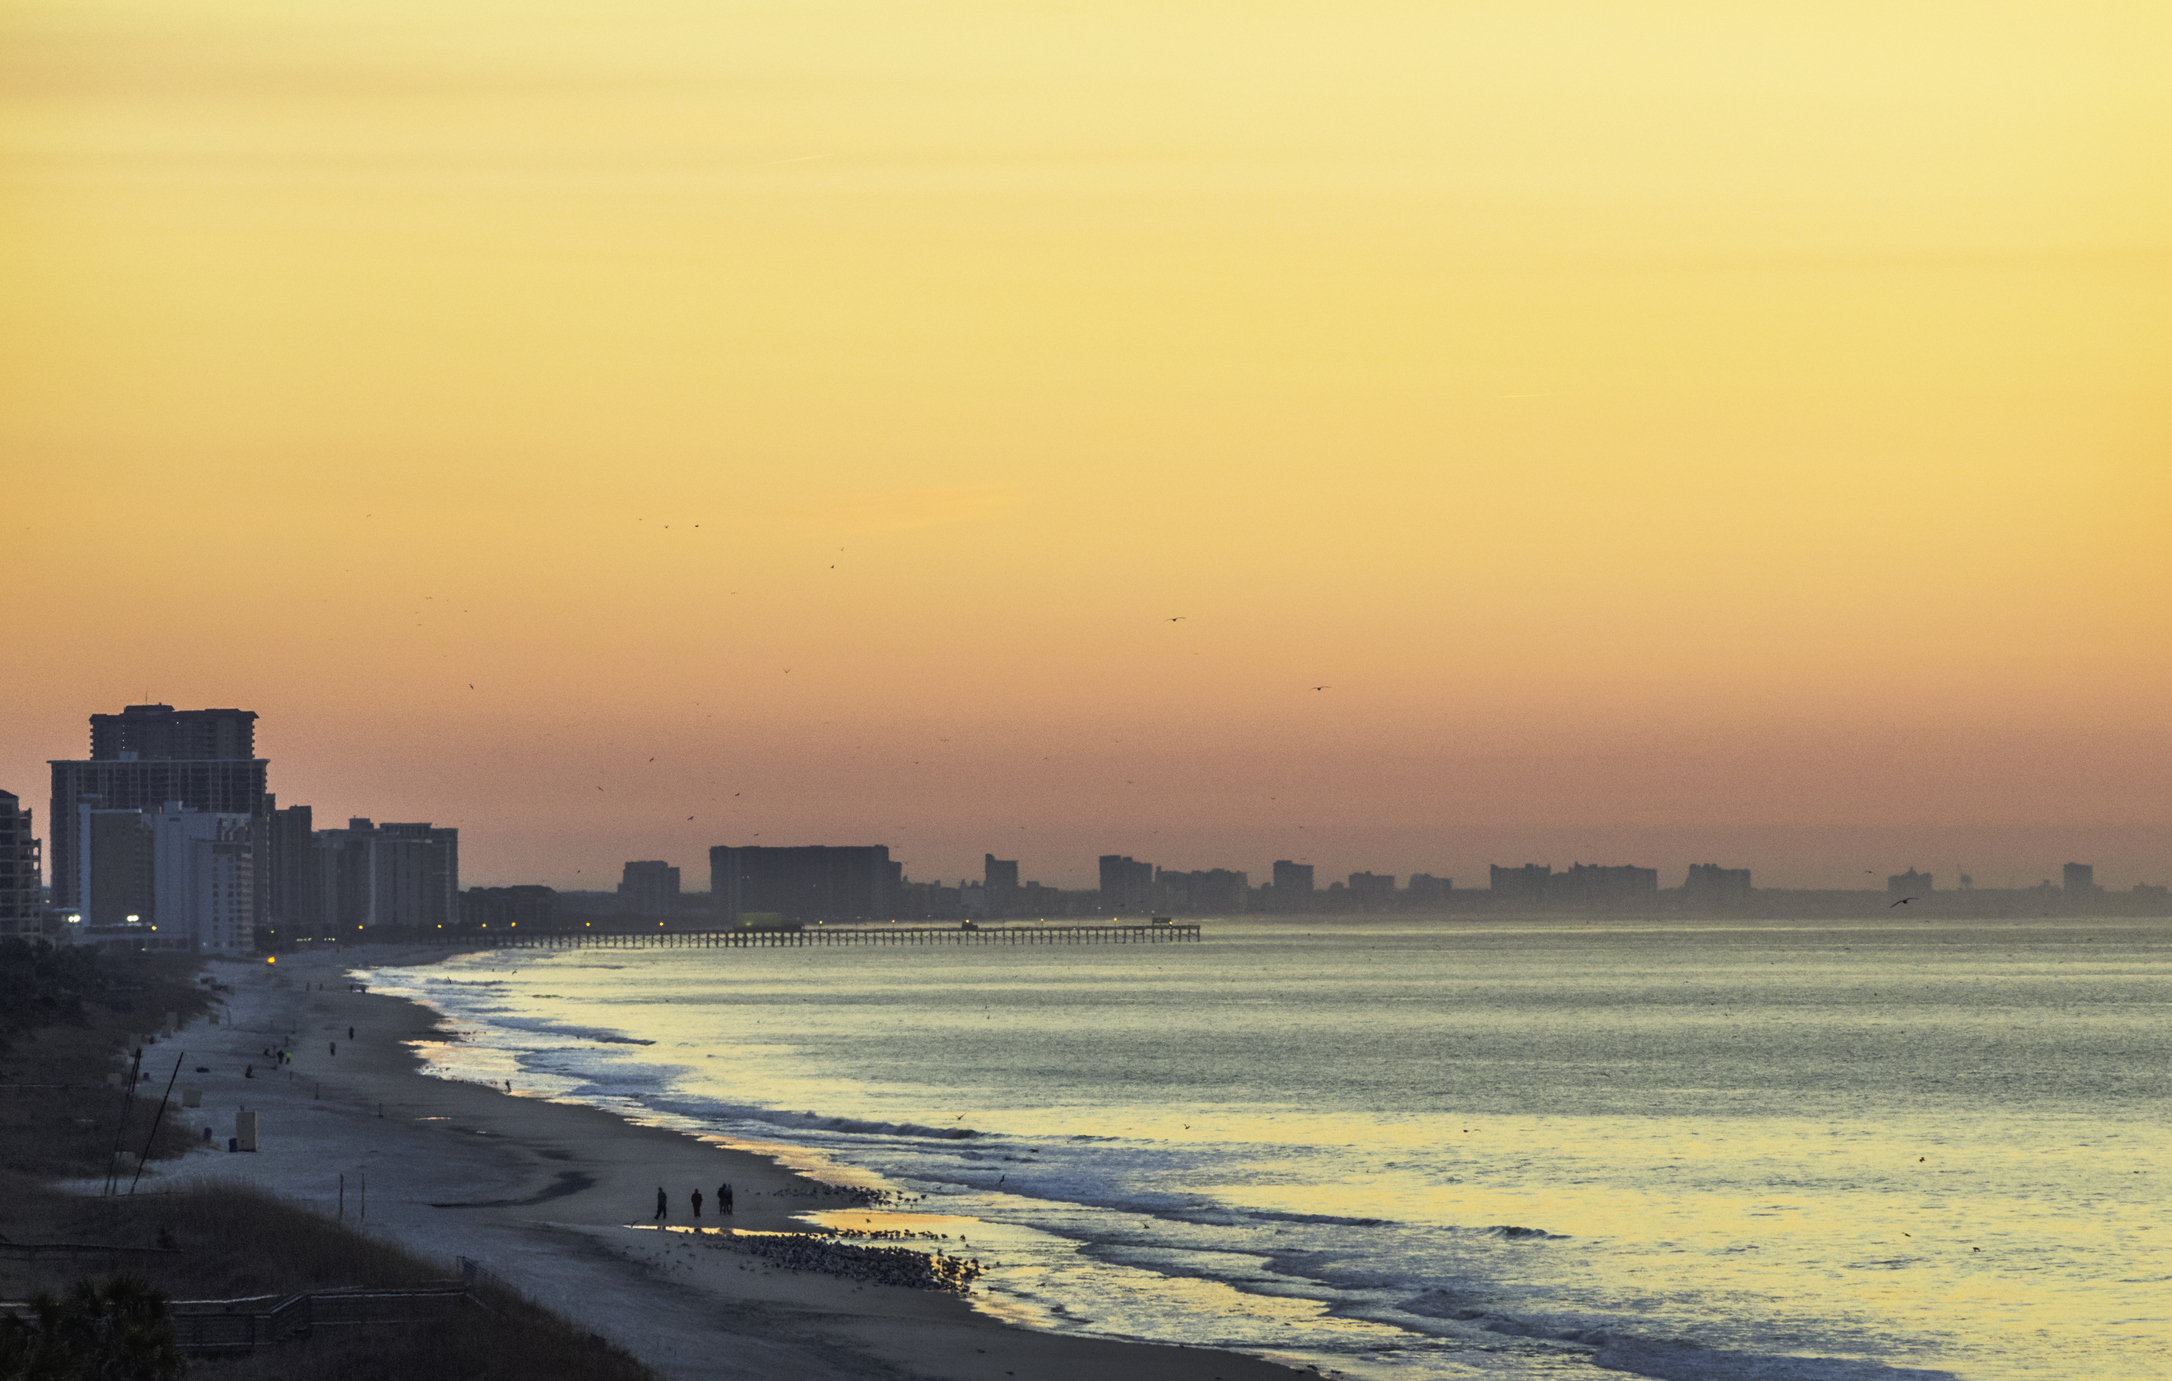 Escape the Cold this Winter to Myrtle Beach